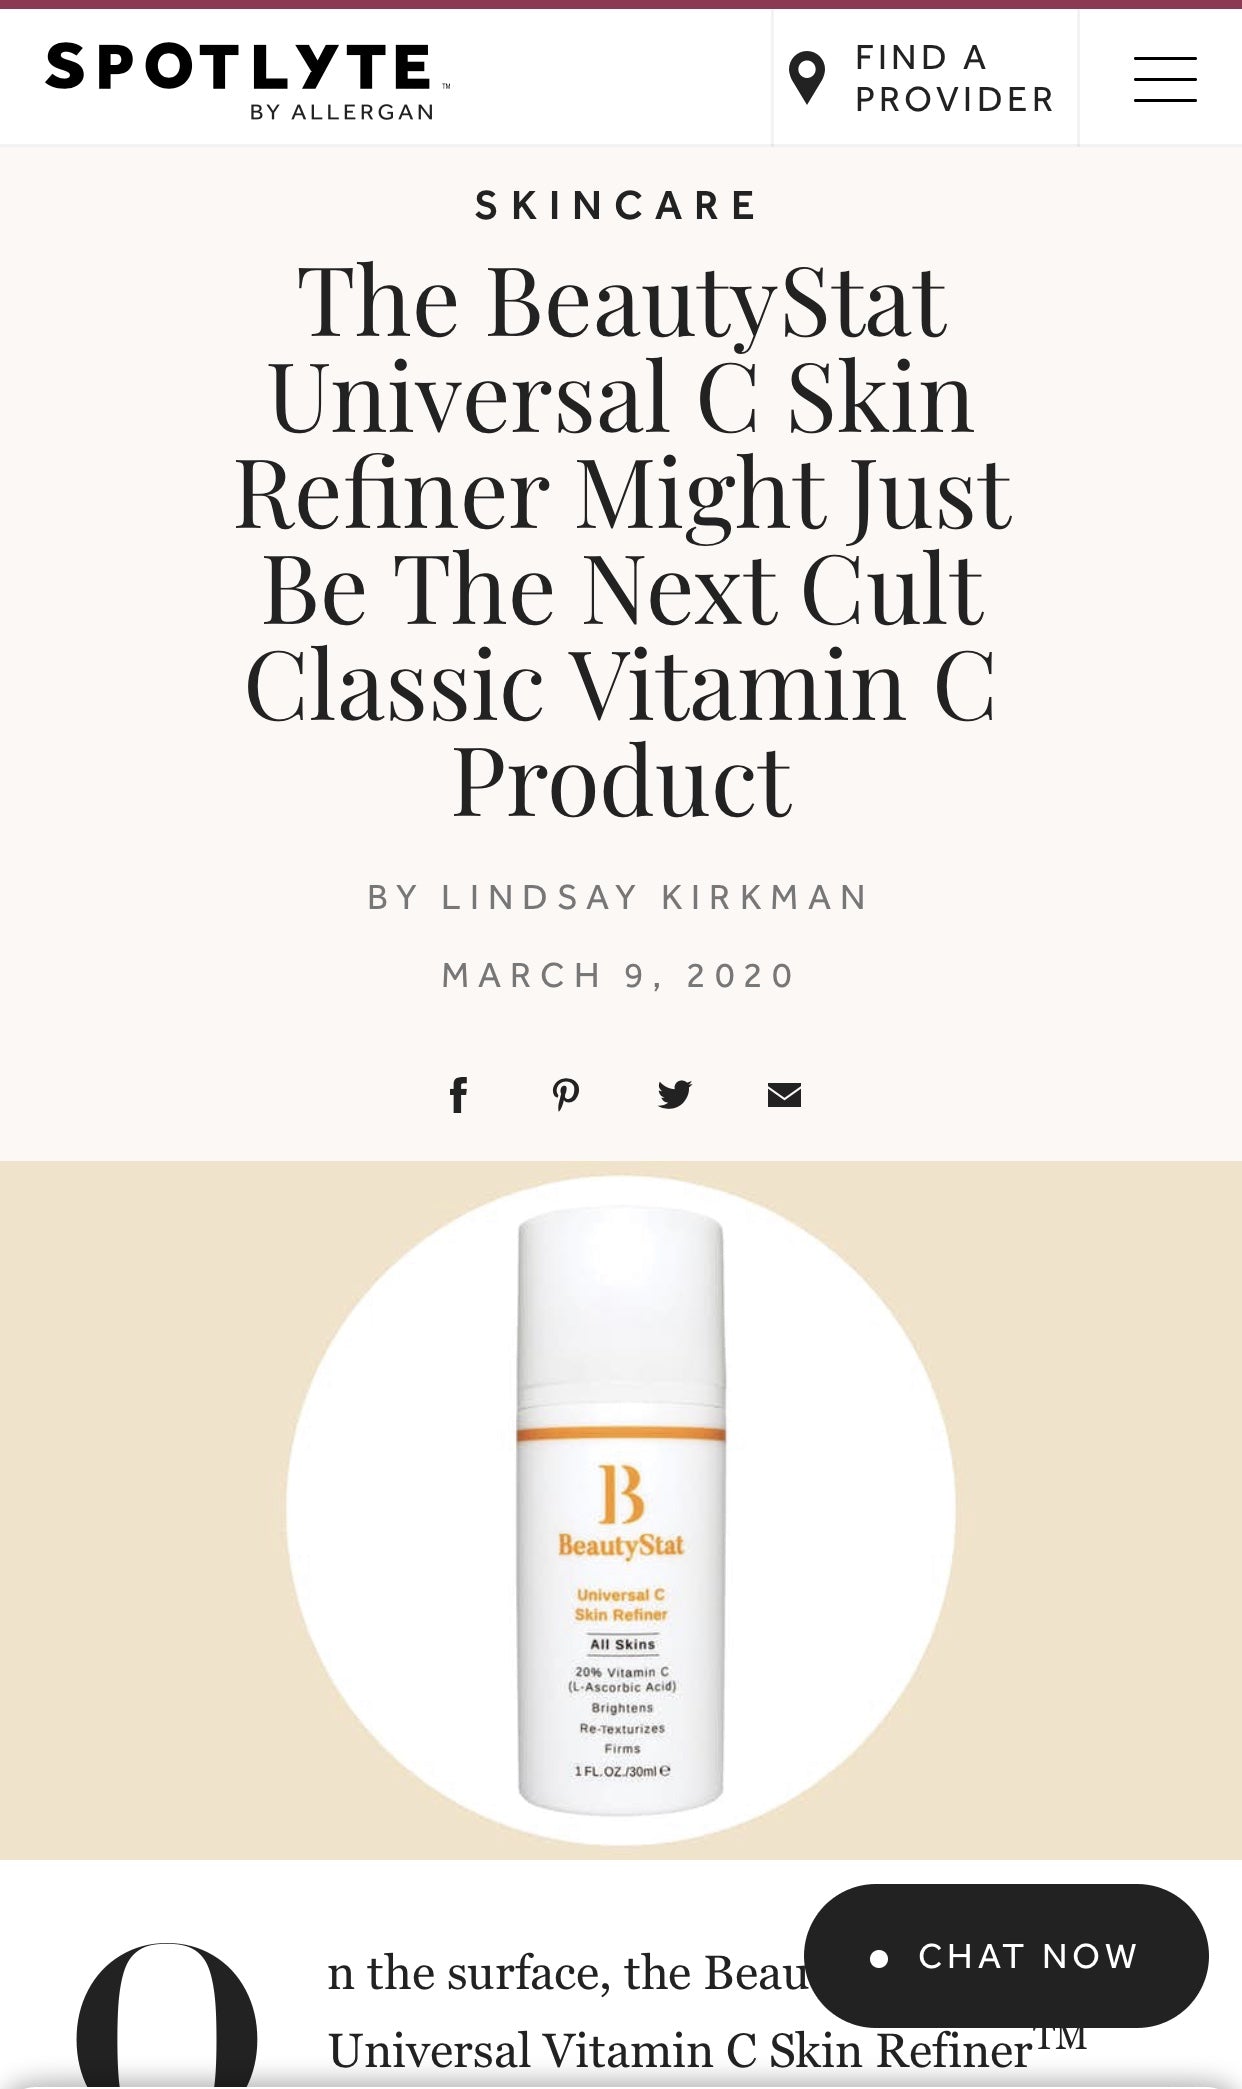 In Spotlyte: Universal C Skin Refiner Might Be The Next Cult Classic Vitamin C Serum best review